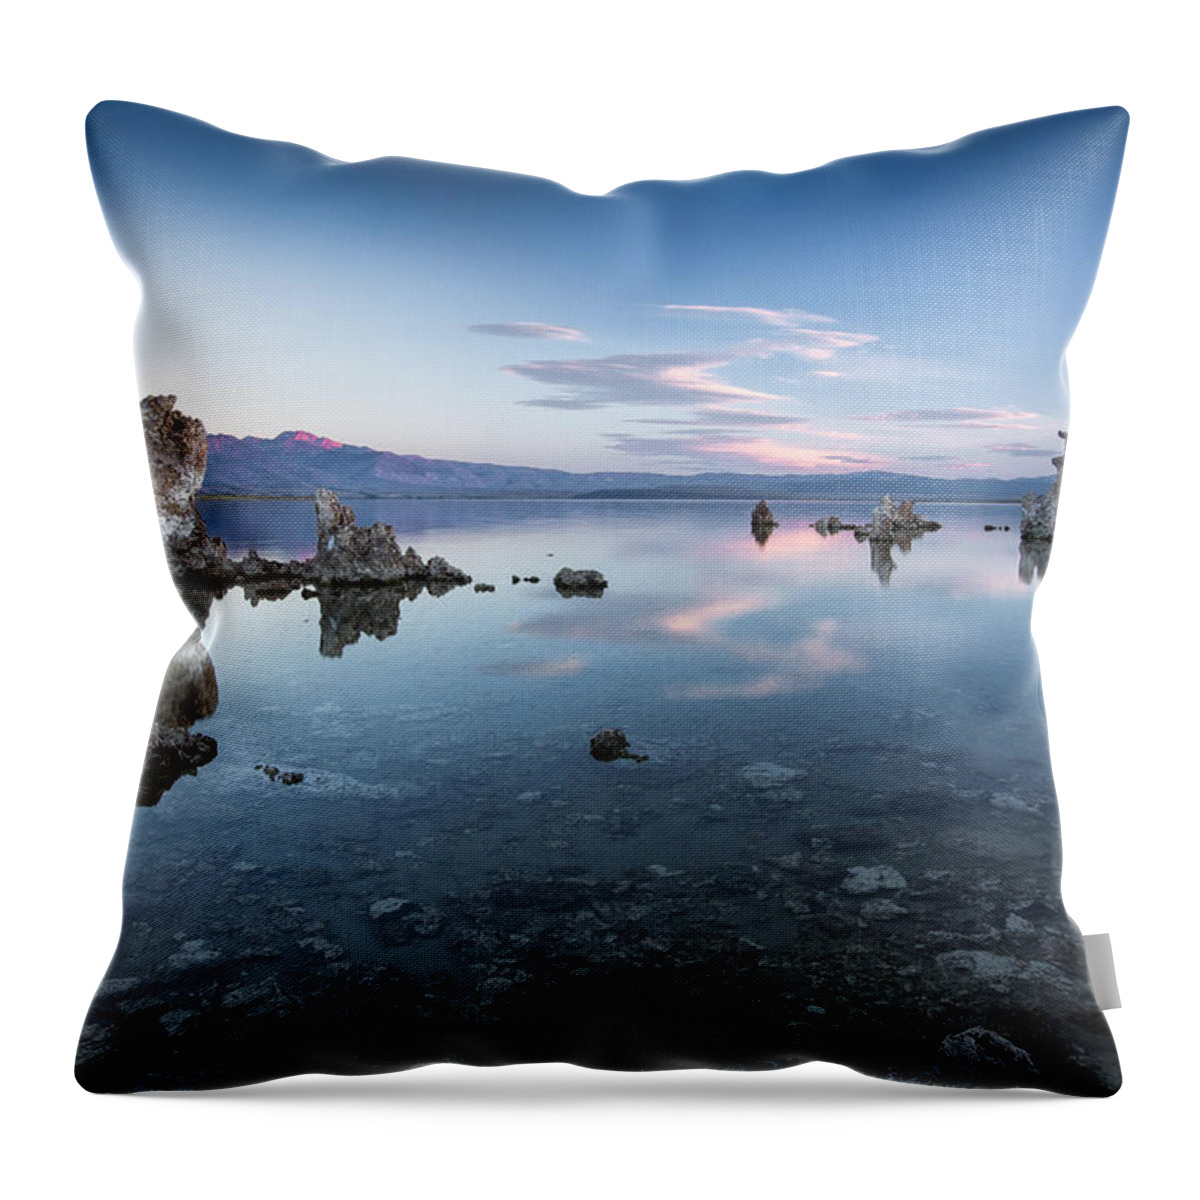 Horizontal Throw Pillow featuring the photograph A Center Point by Jon Glaser